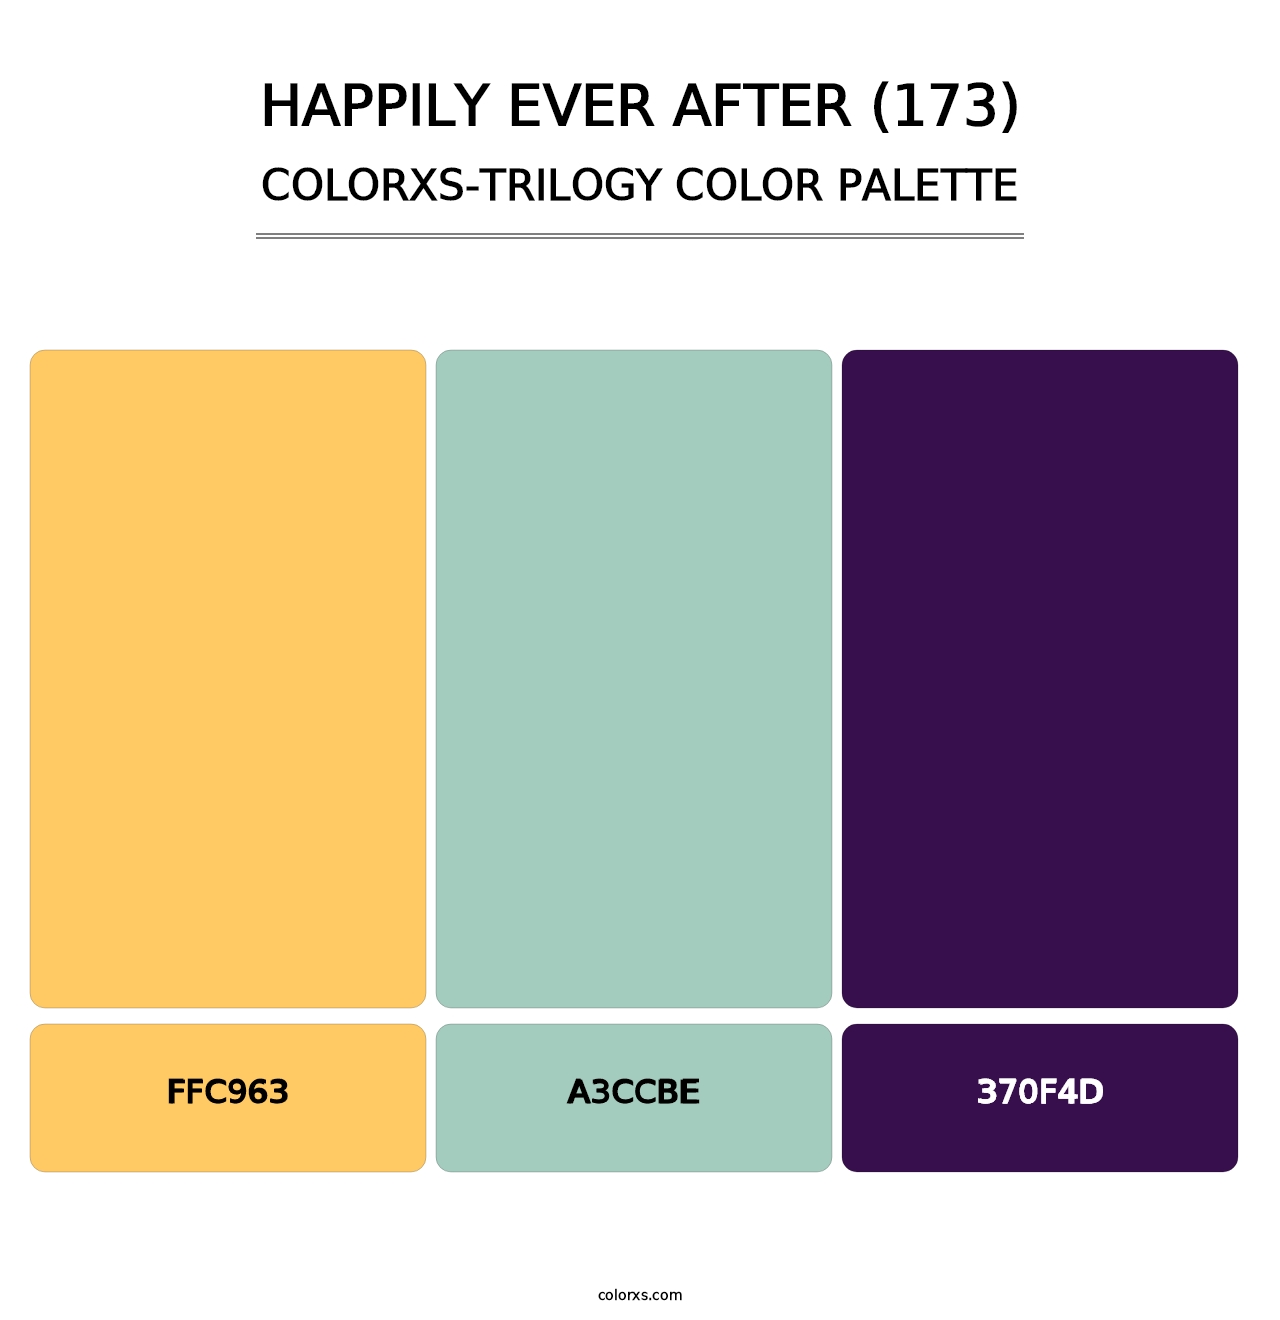 Happily Ever After (173) - Colorxs Trilogy Palette